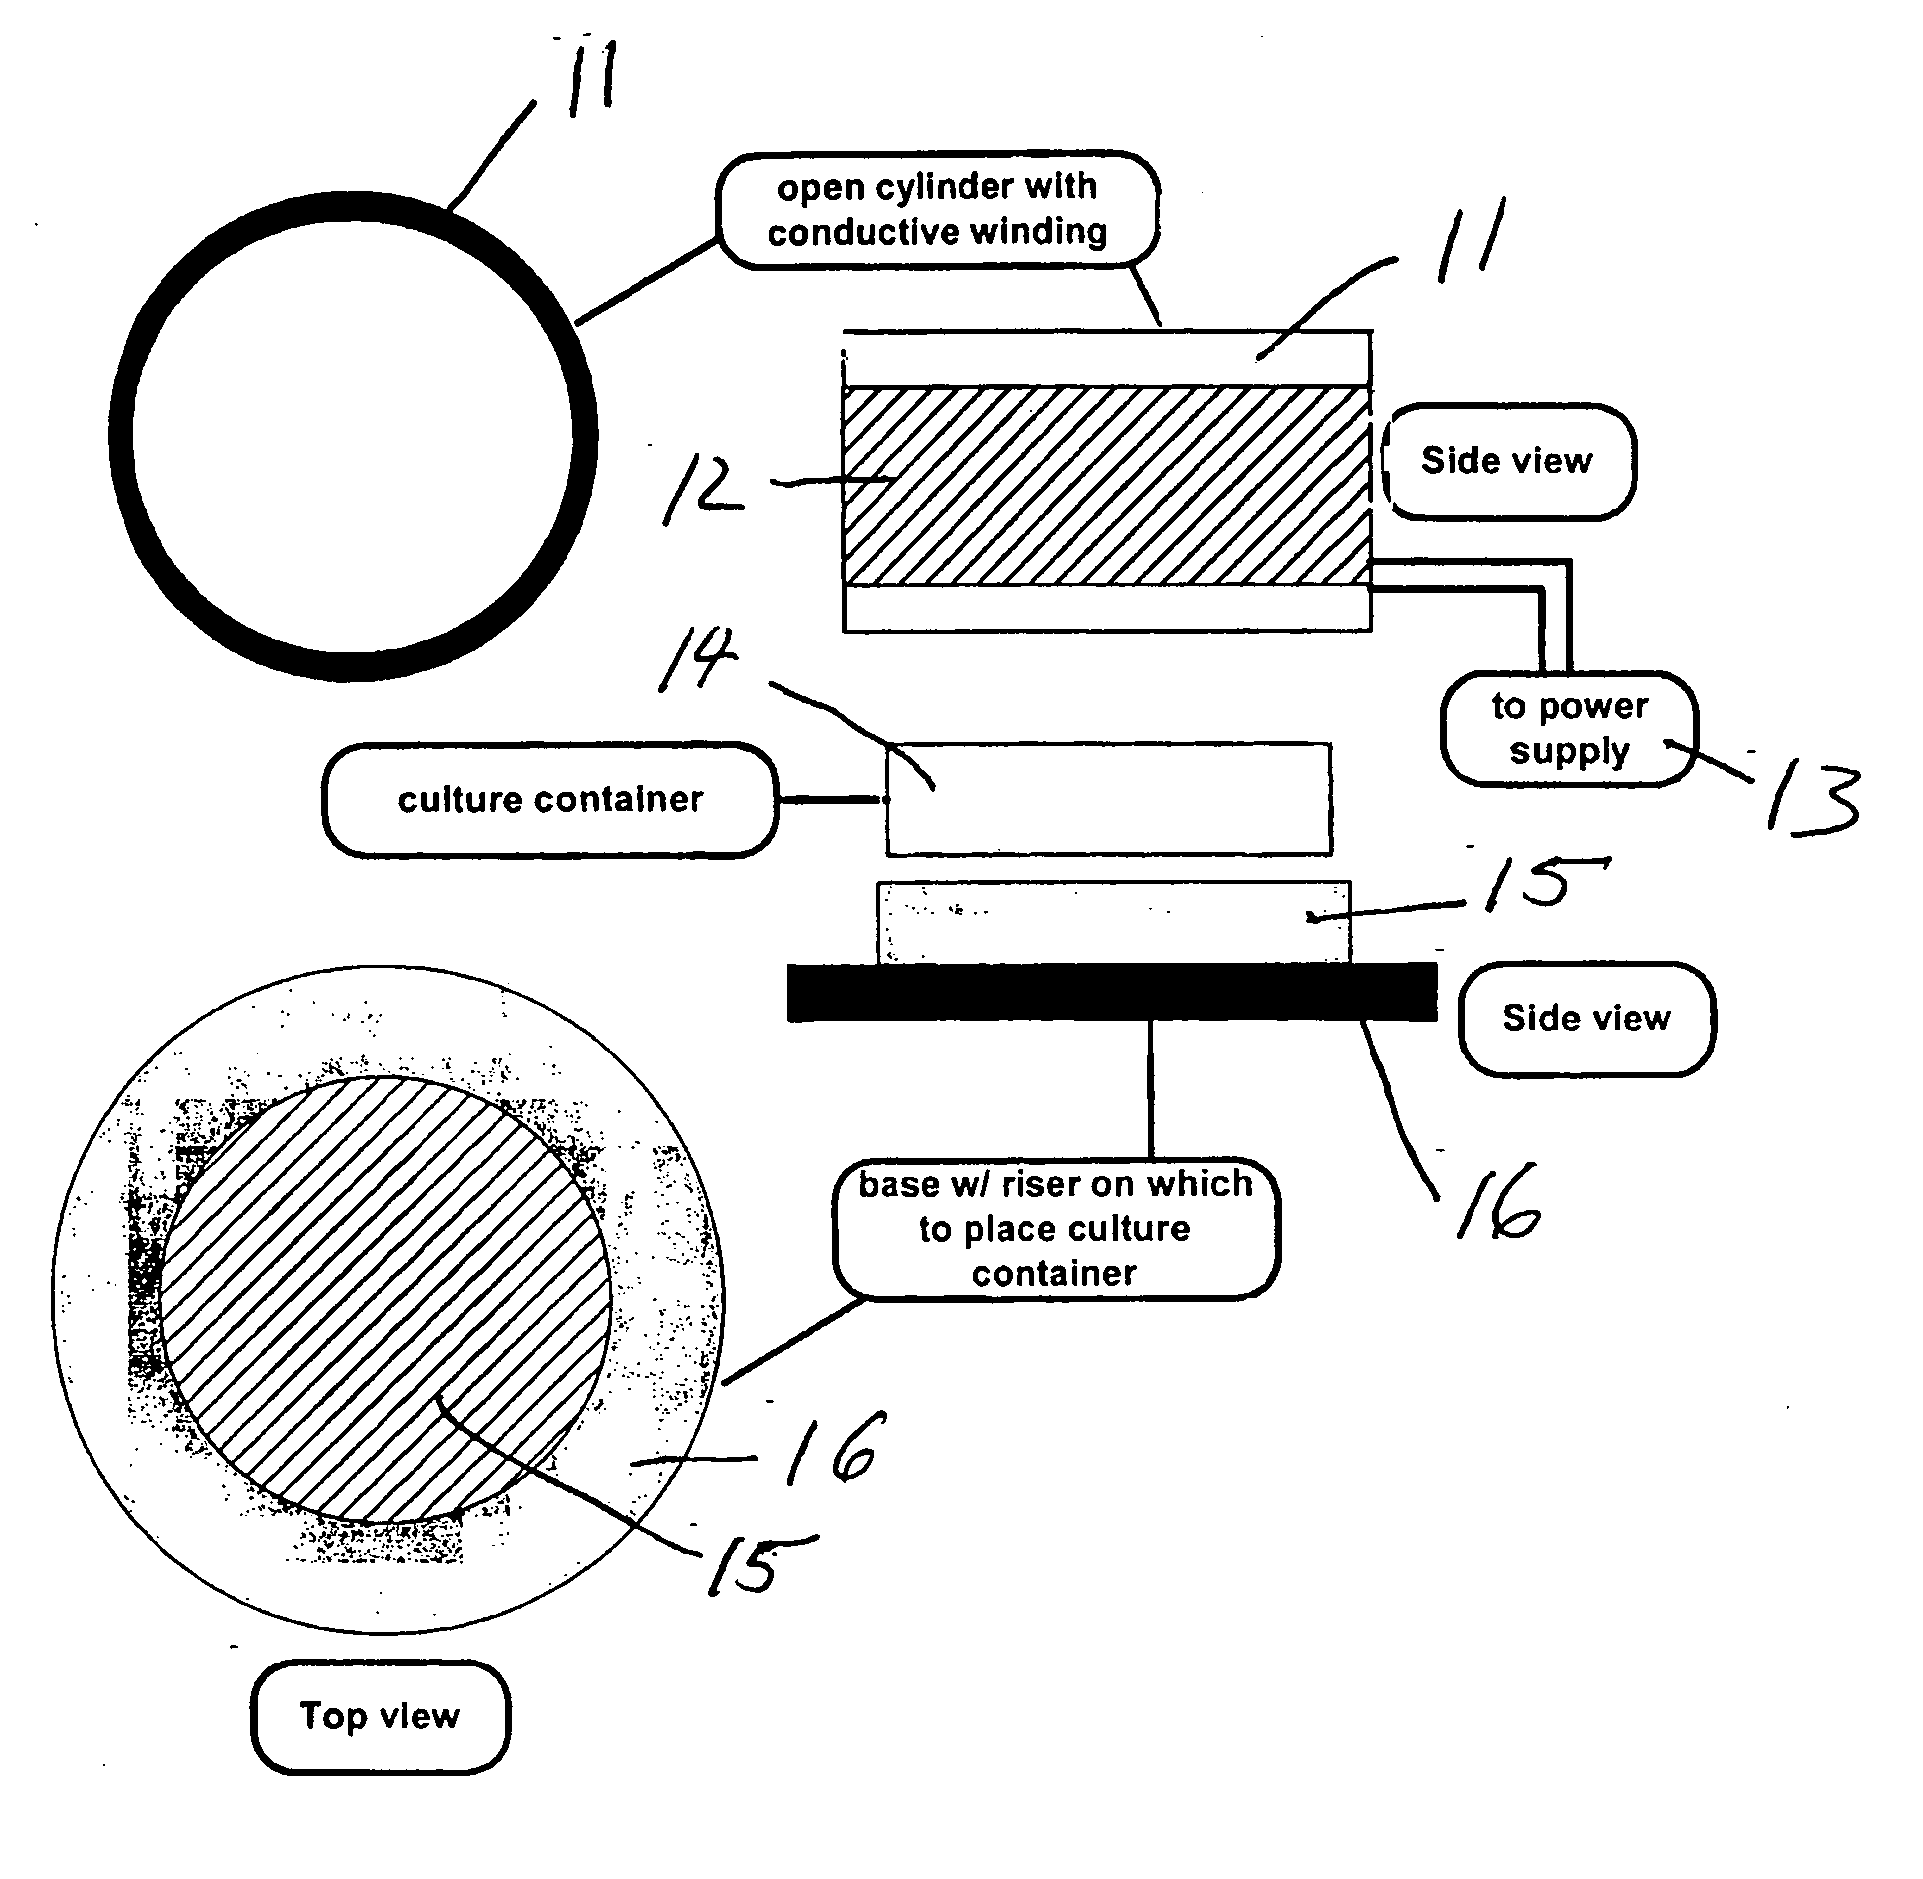 Apparatus for enhancing proliferation of cells in a small-scale cell culturing container